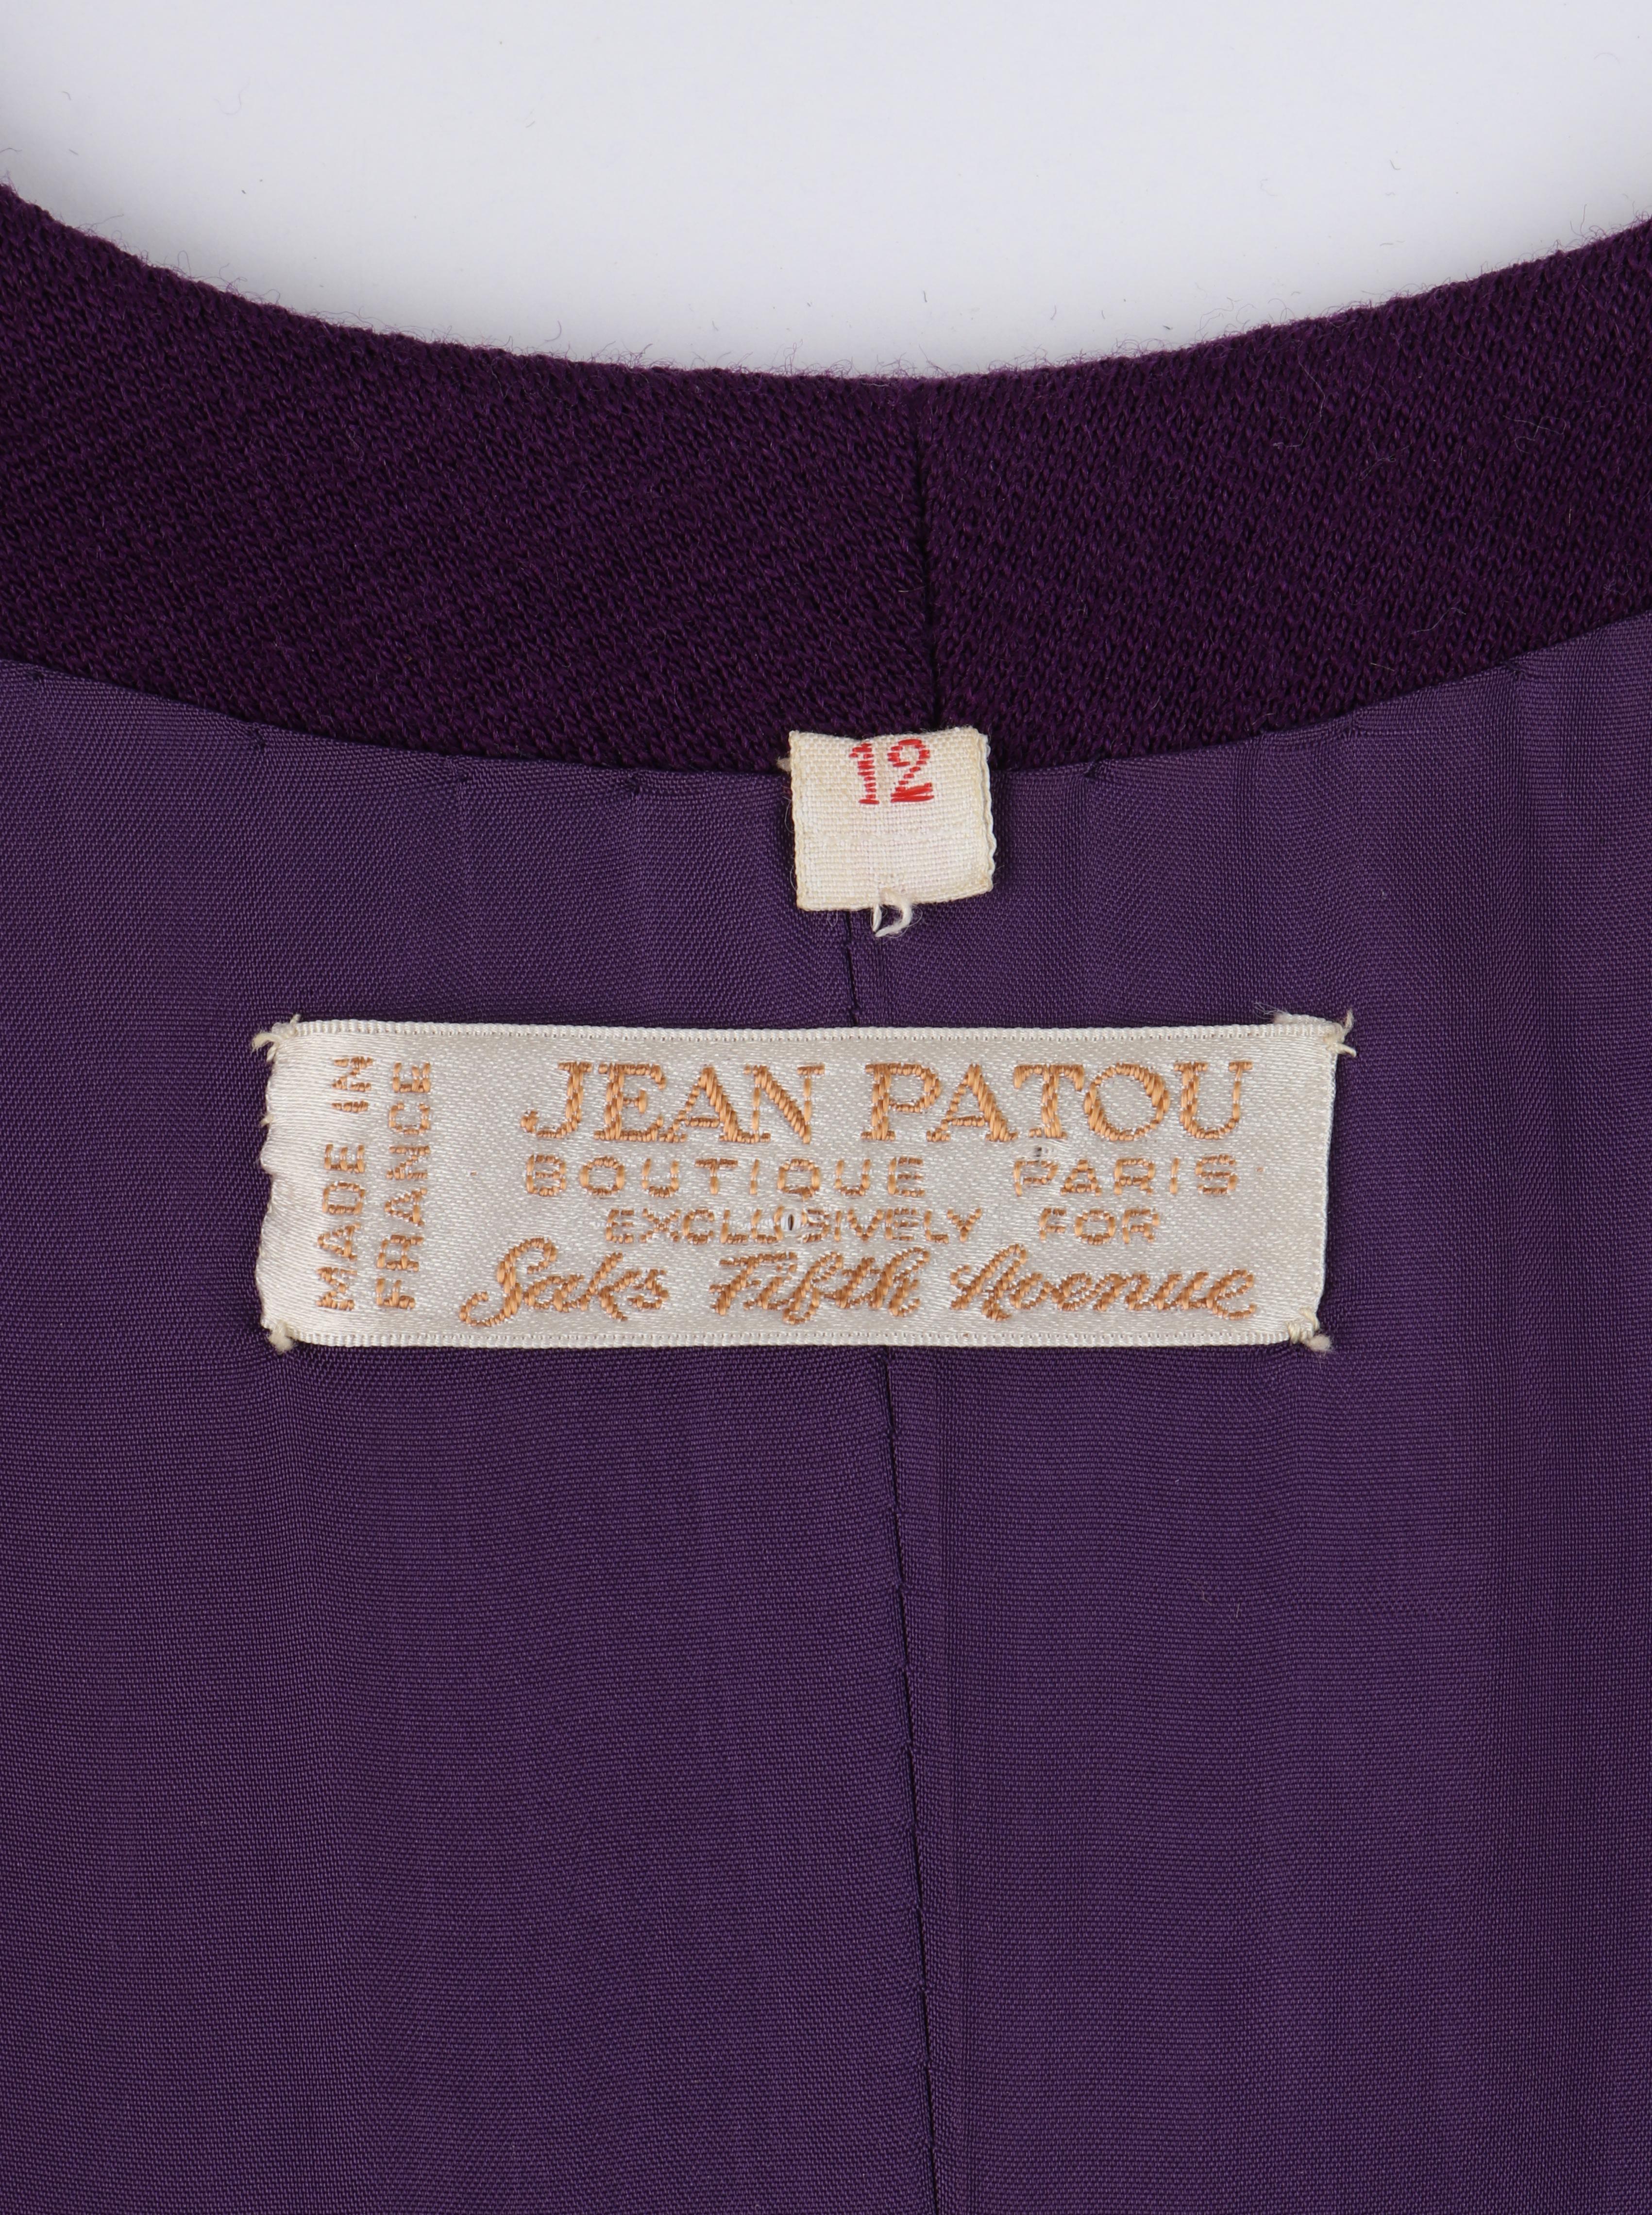 JEAN PATOU c.1960's Purple Sleeveless Double Breasted Button Up Mod Shift Dress For Sale 3